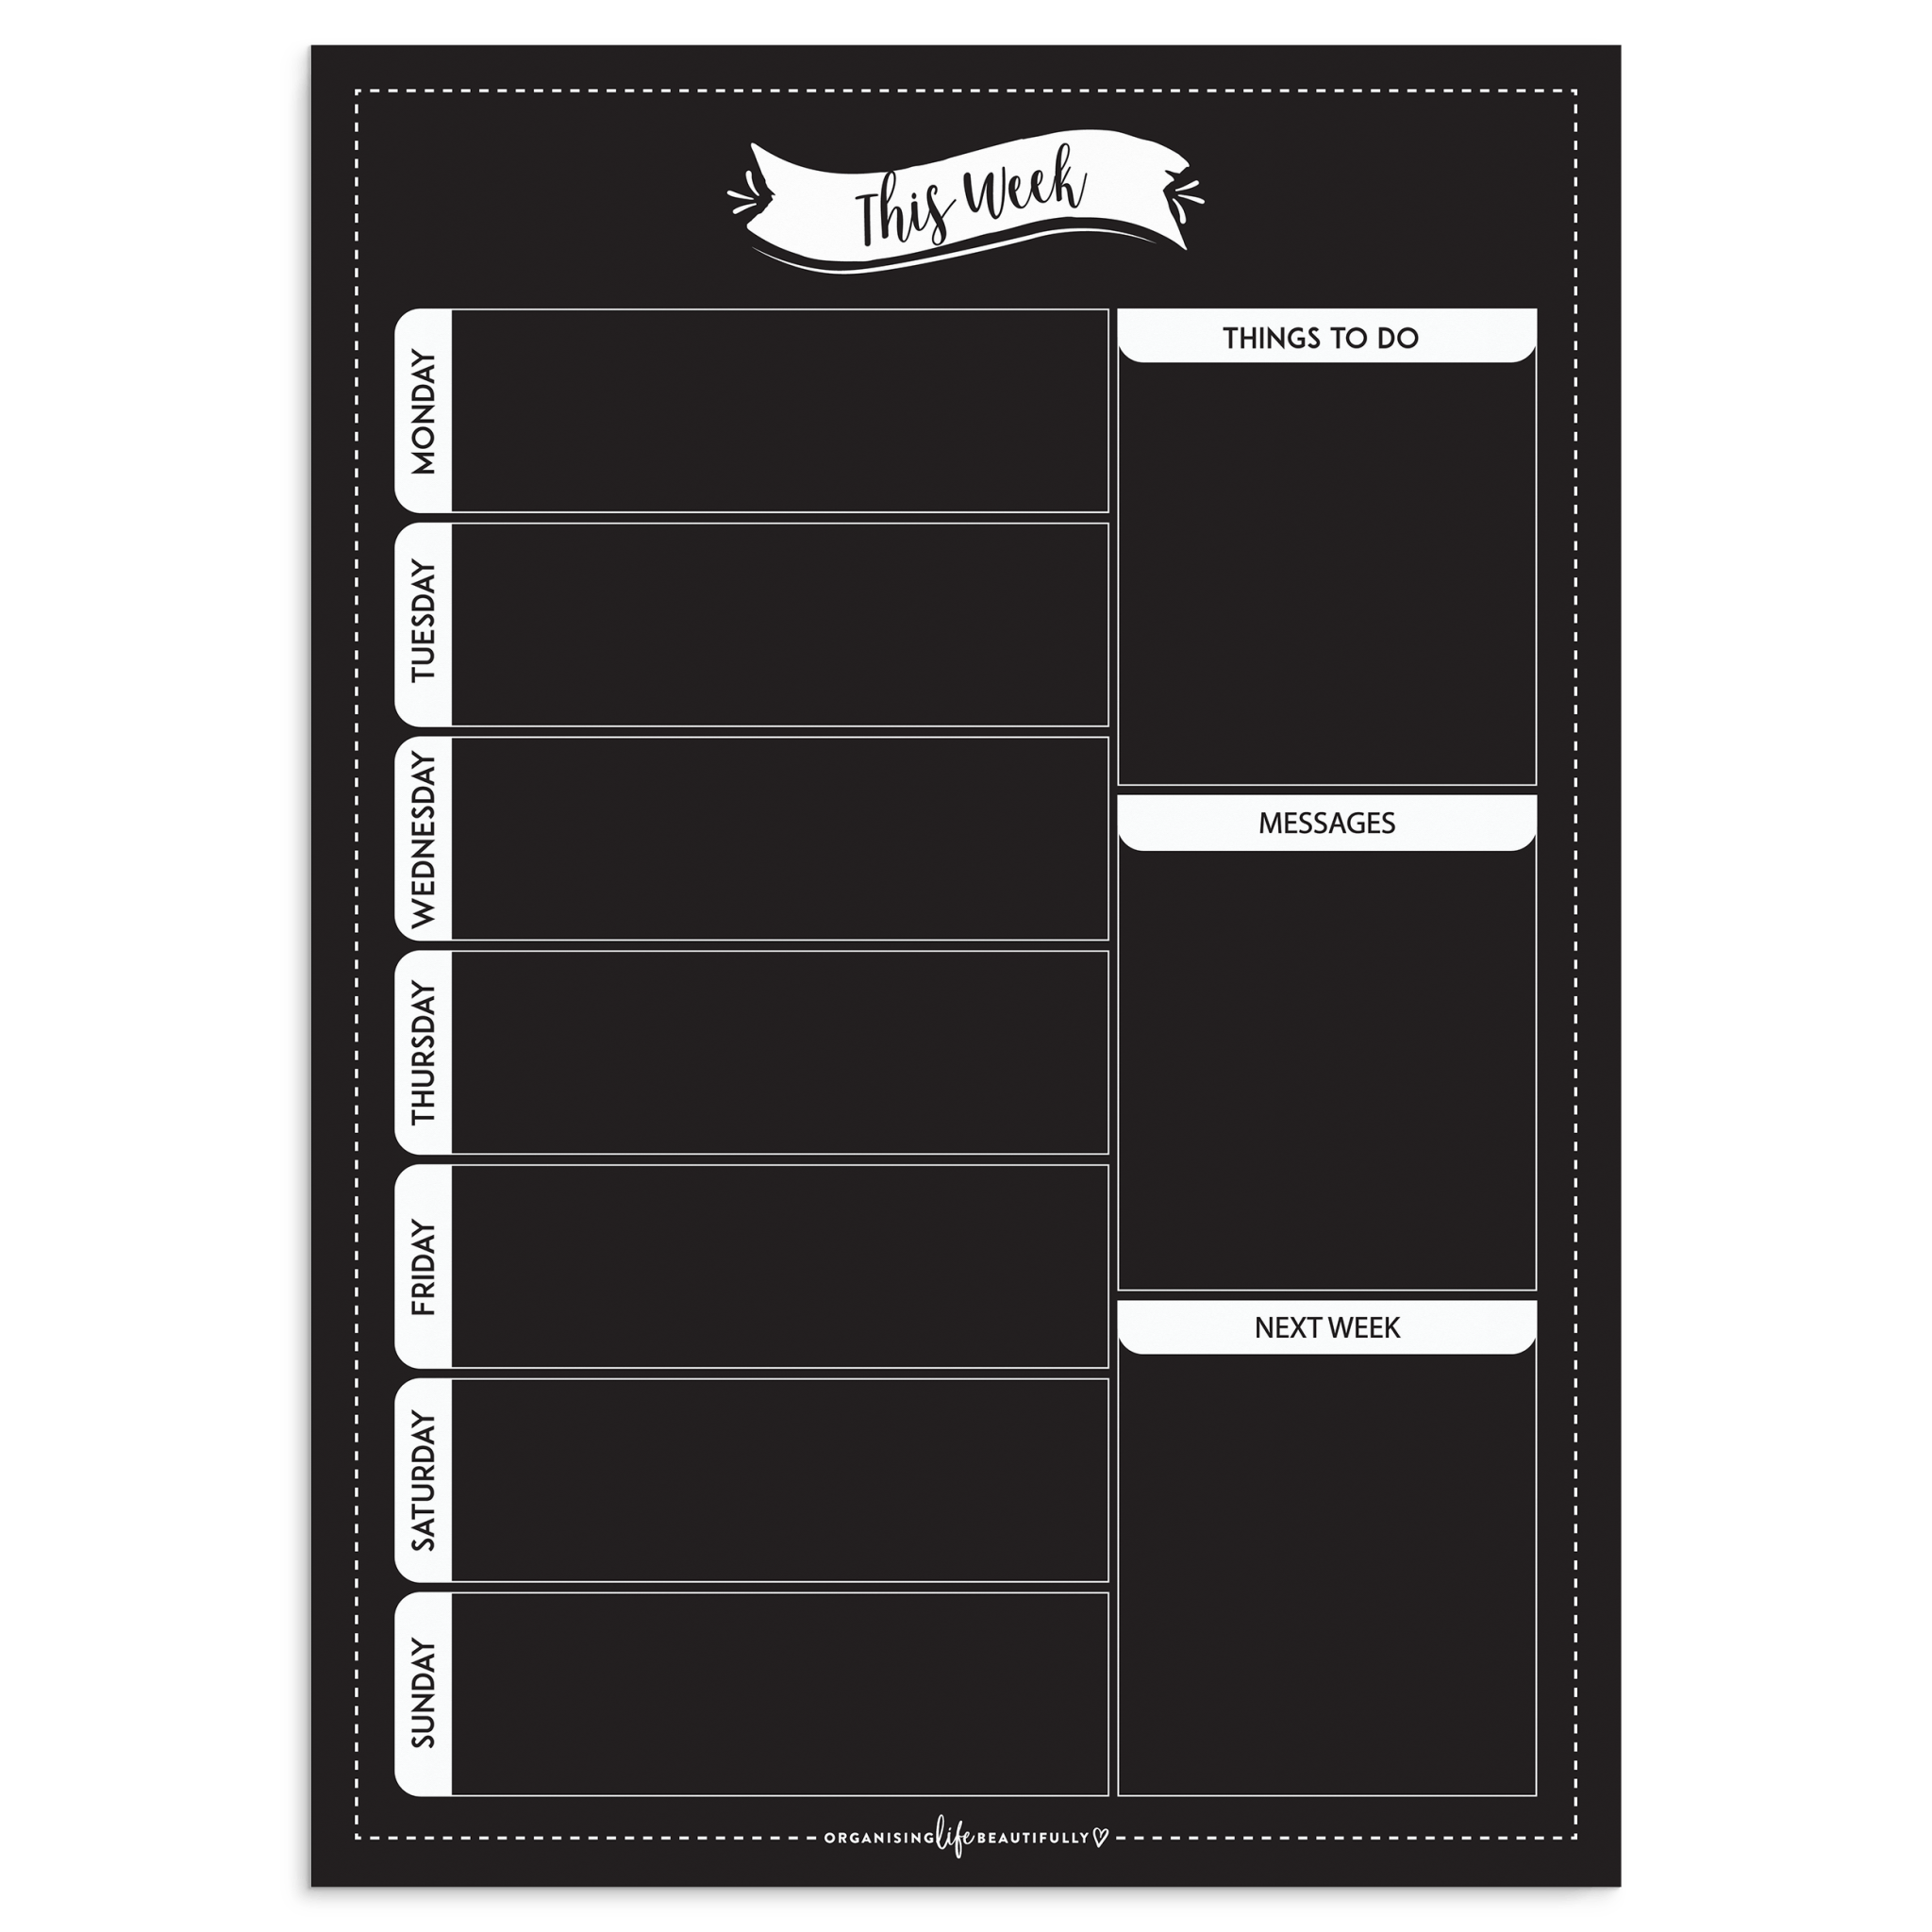 Weekly Planner - Simplify Your Life With A White Weekly Planner